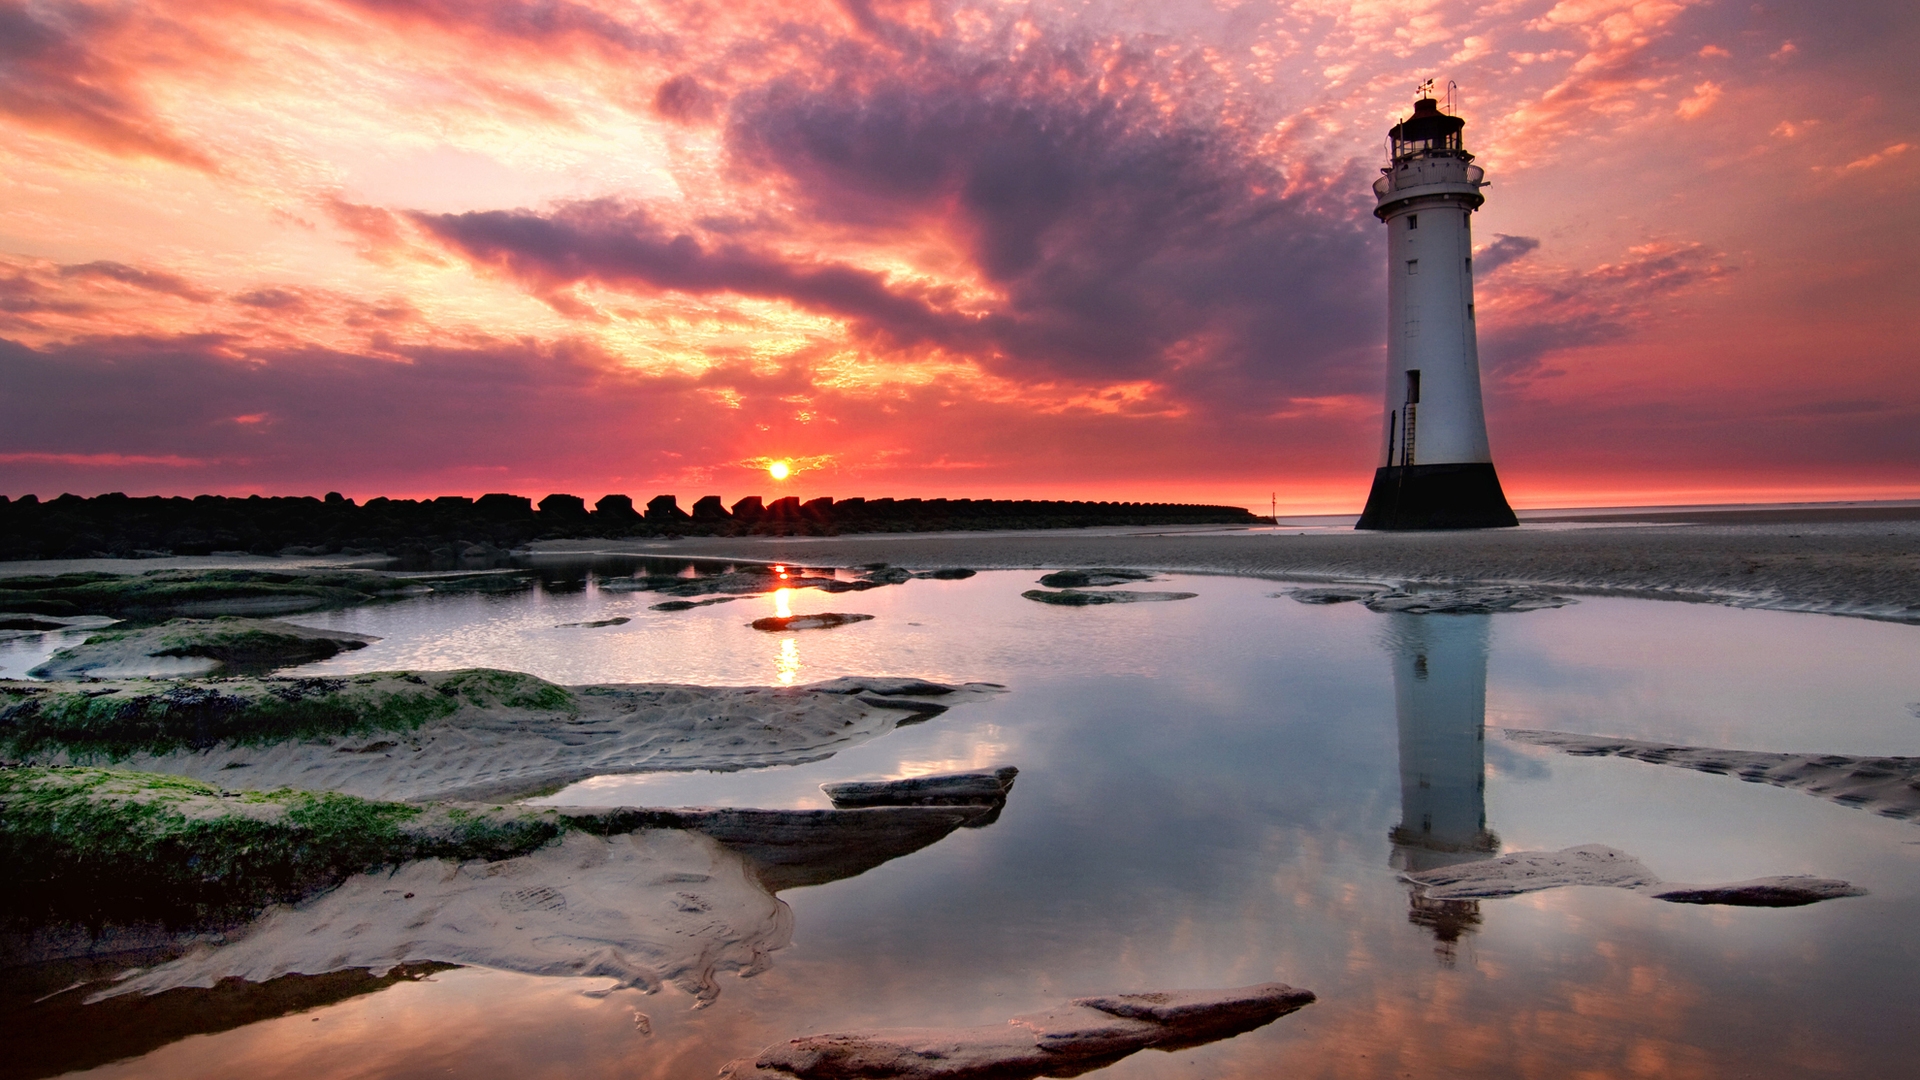 Lighthouse Sunset View for 1920 x 1080 HDTV 1080p resolution